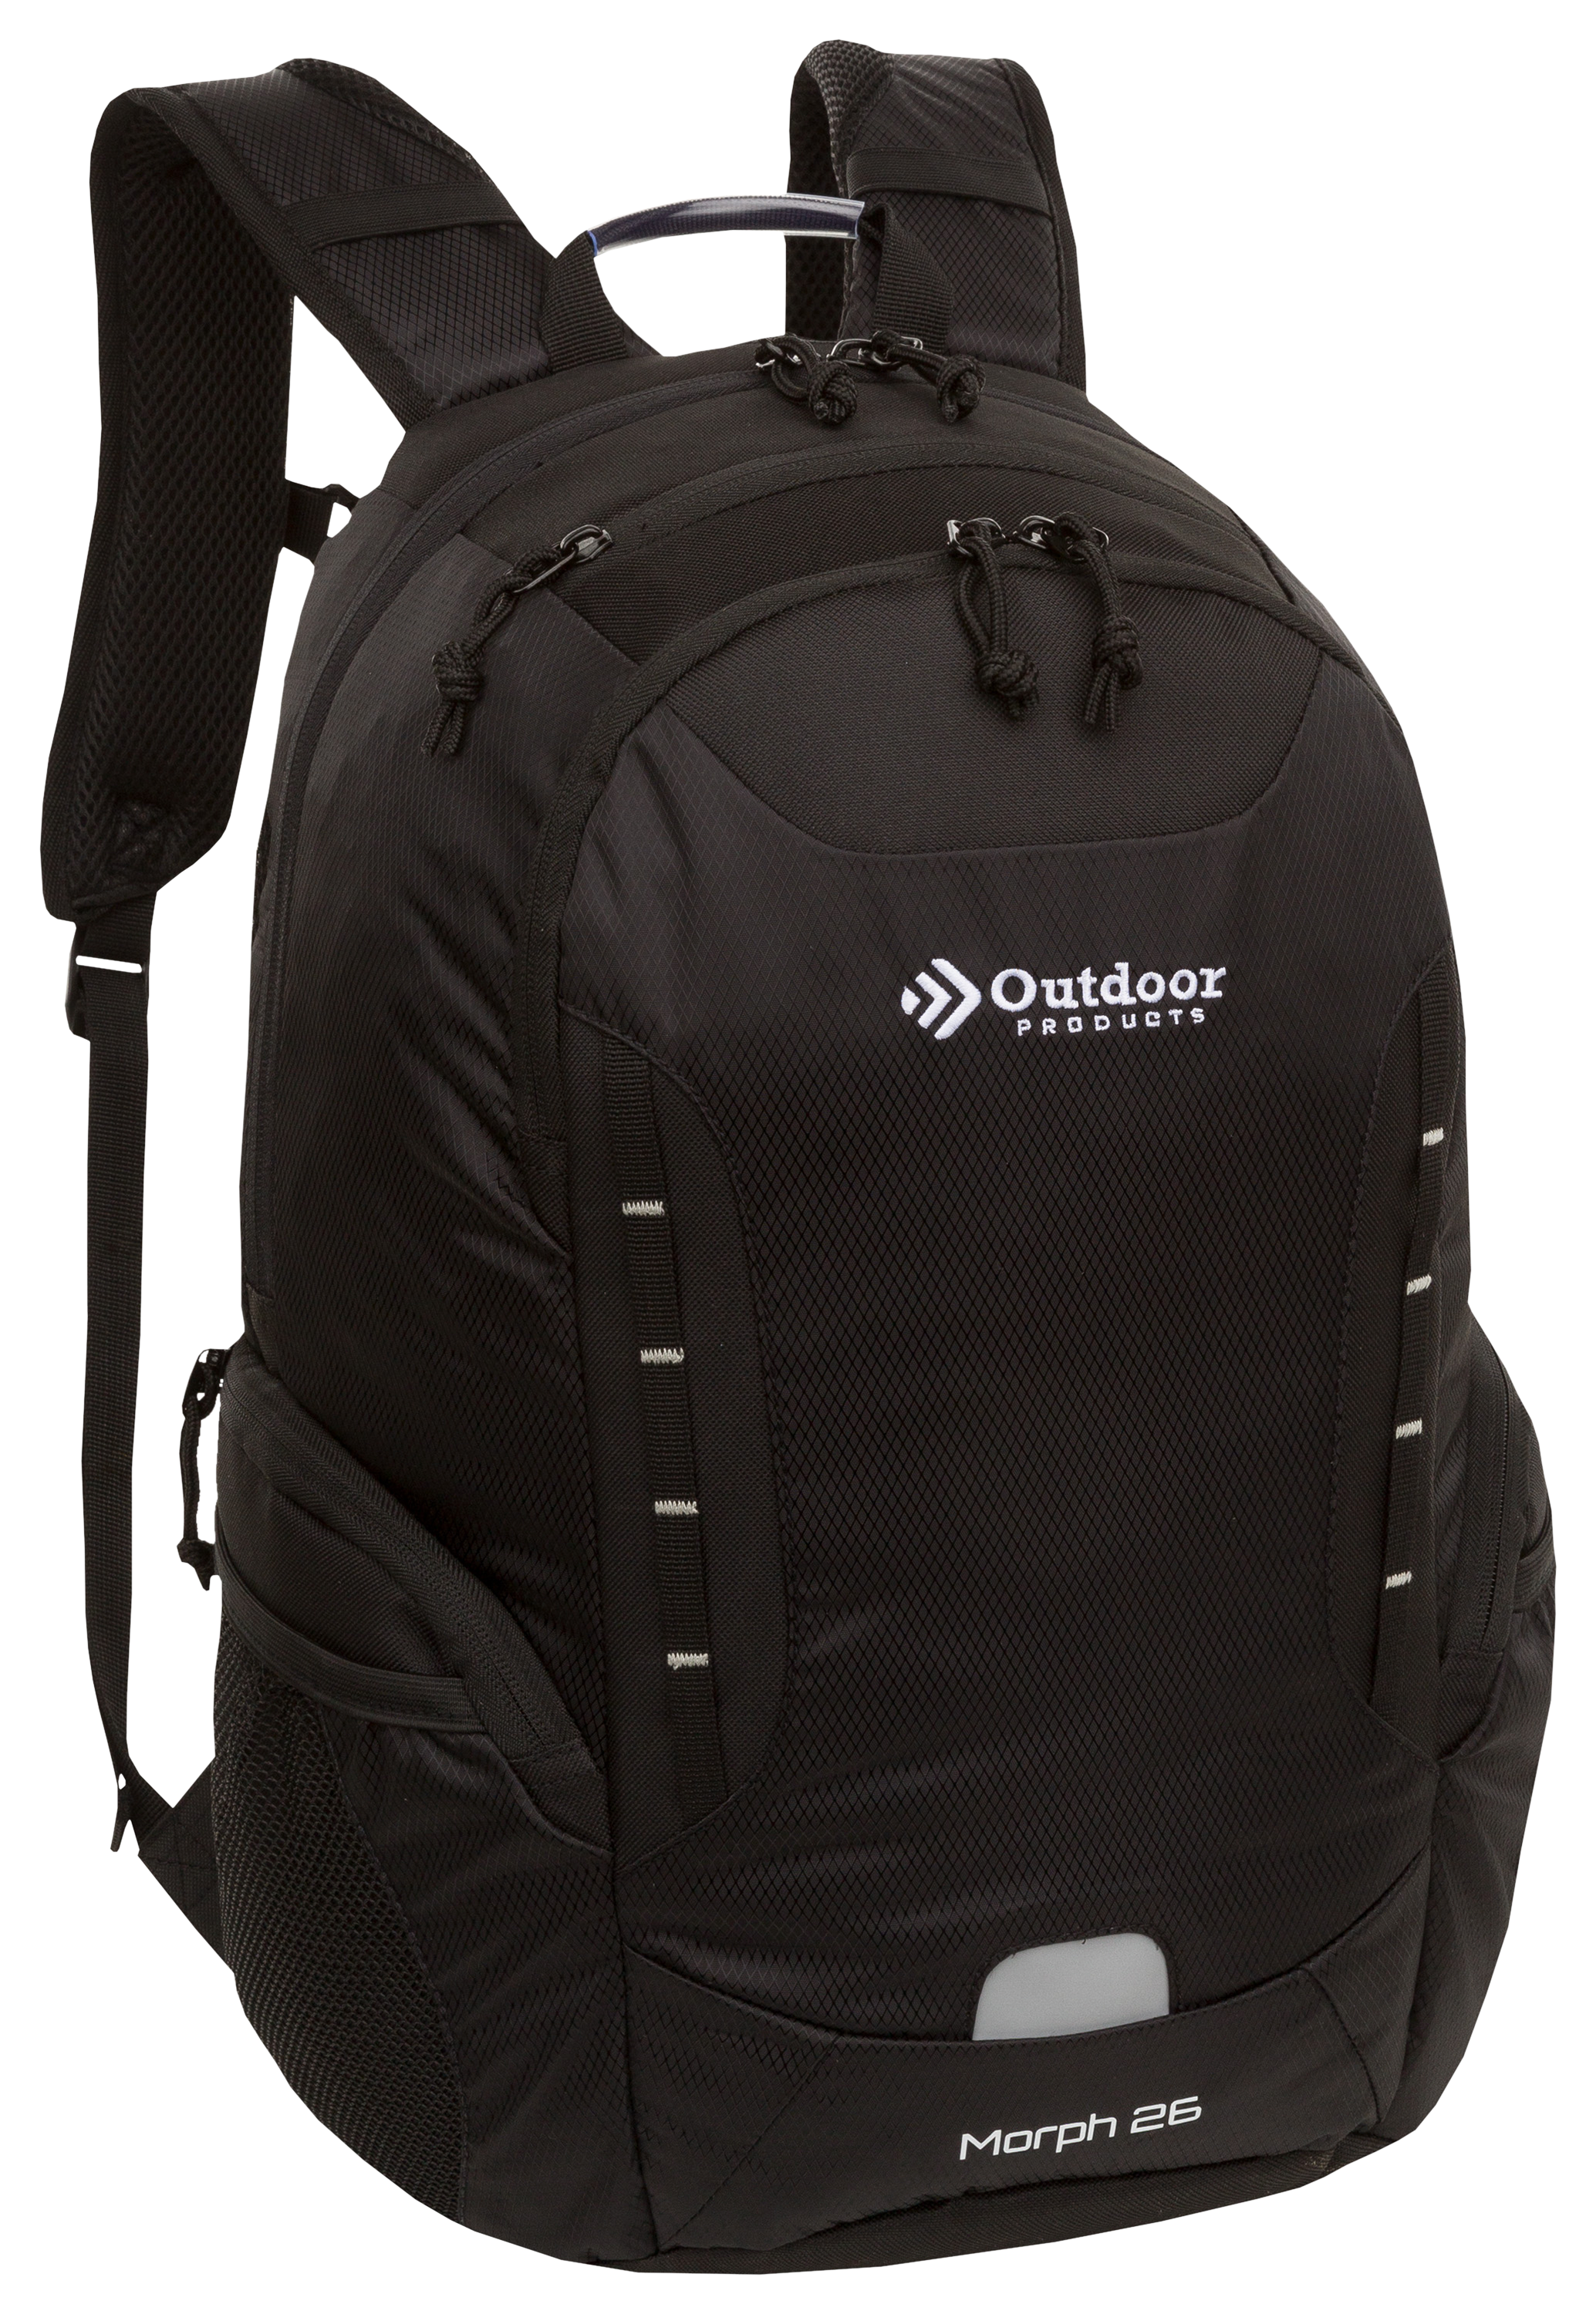 Outdoor Products Morph 27.5L Backpack - Black